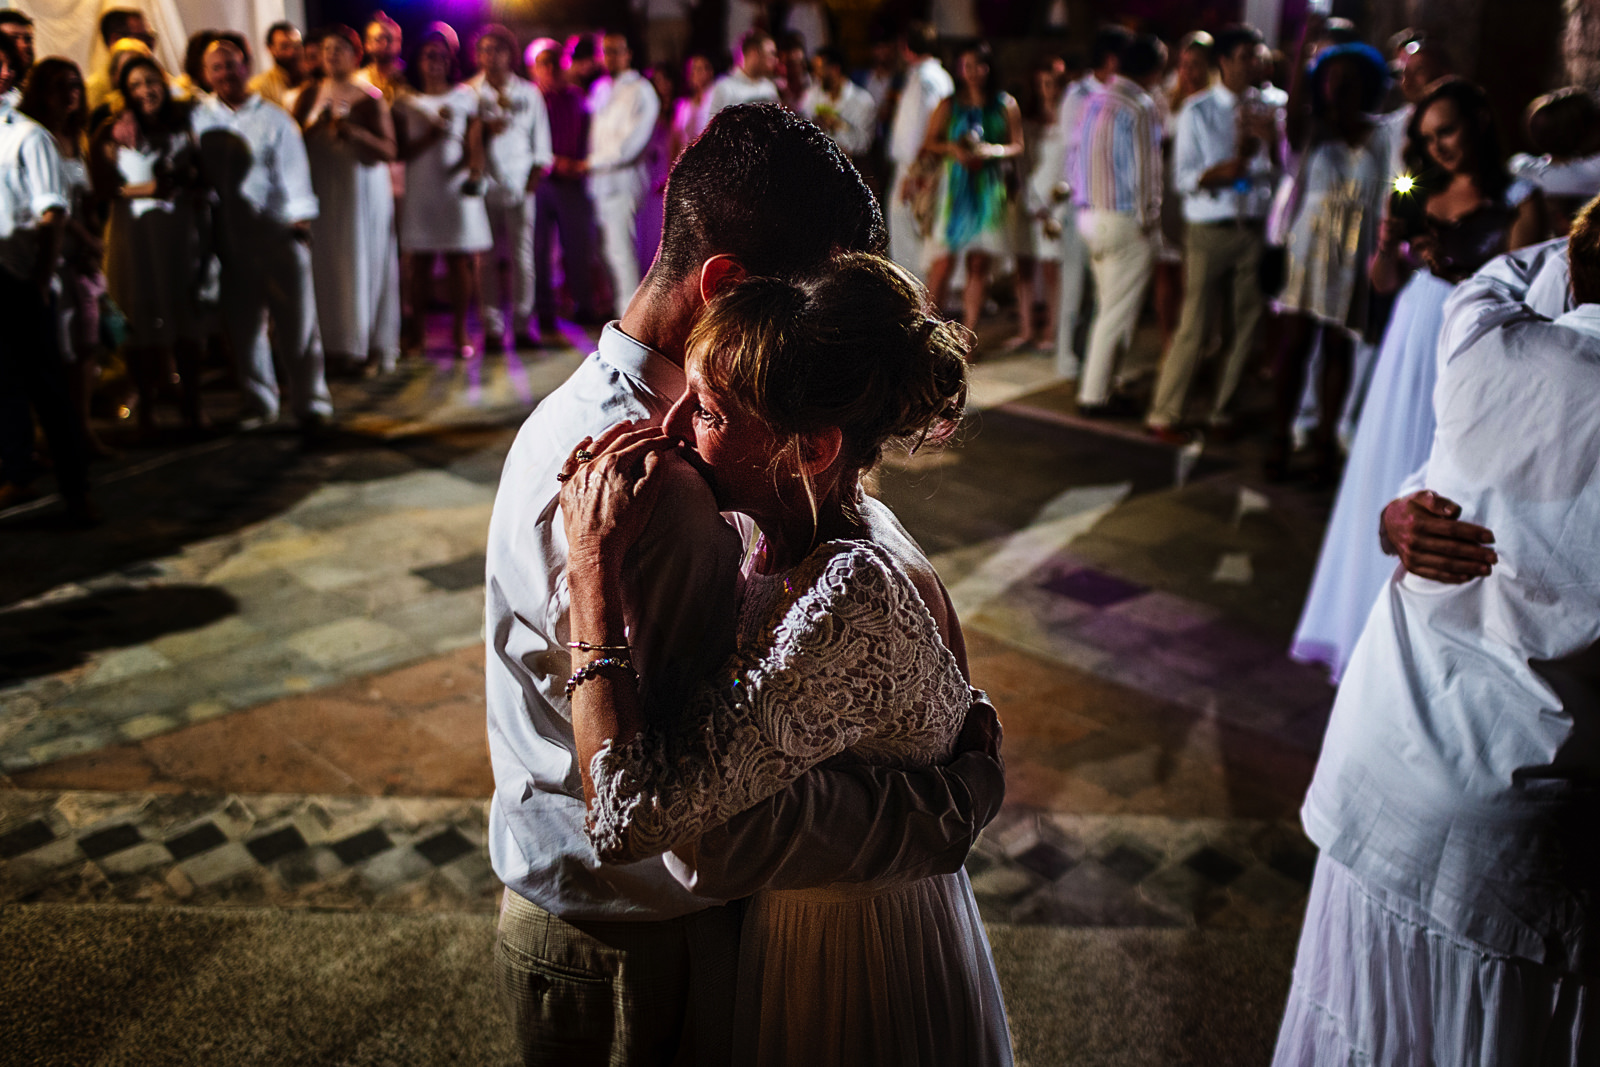 Groom and mother dance in wedding reception in the middle of all the guests and family